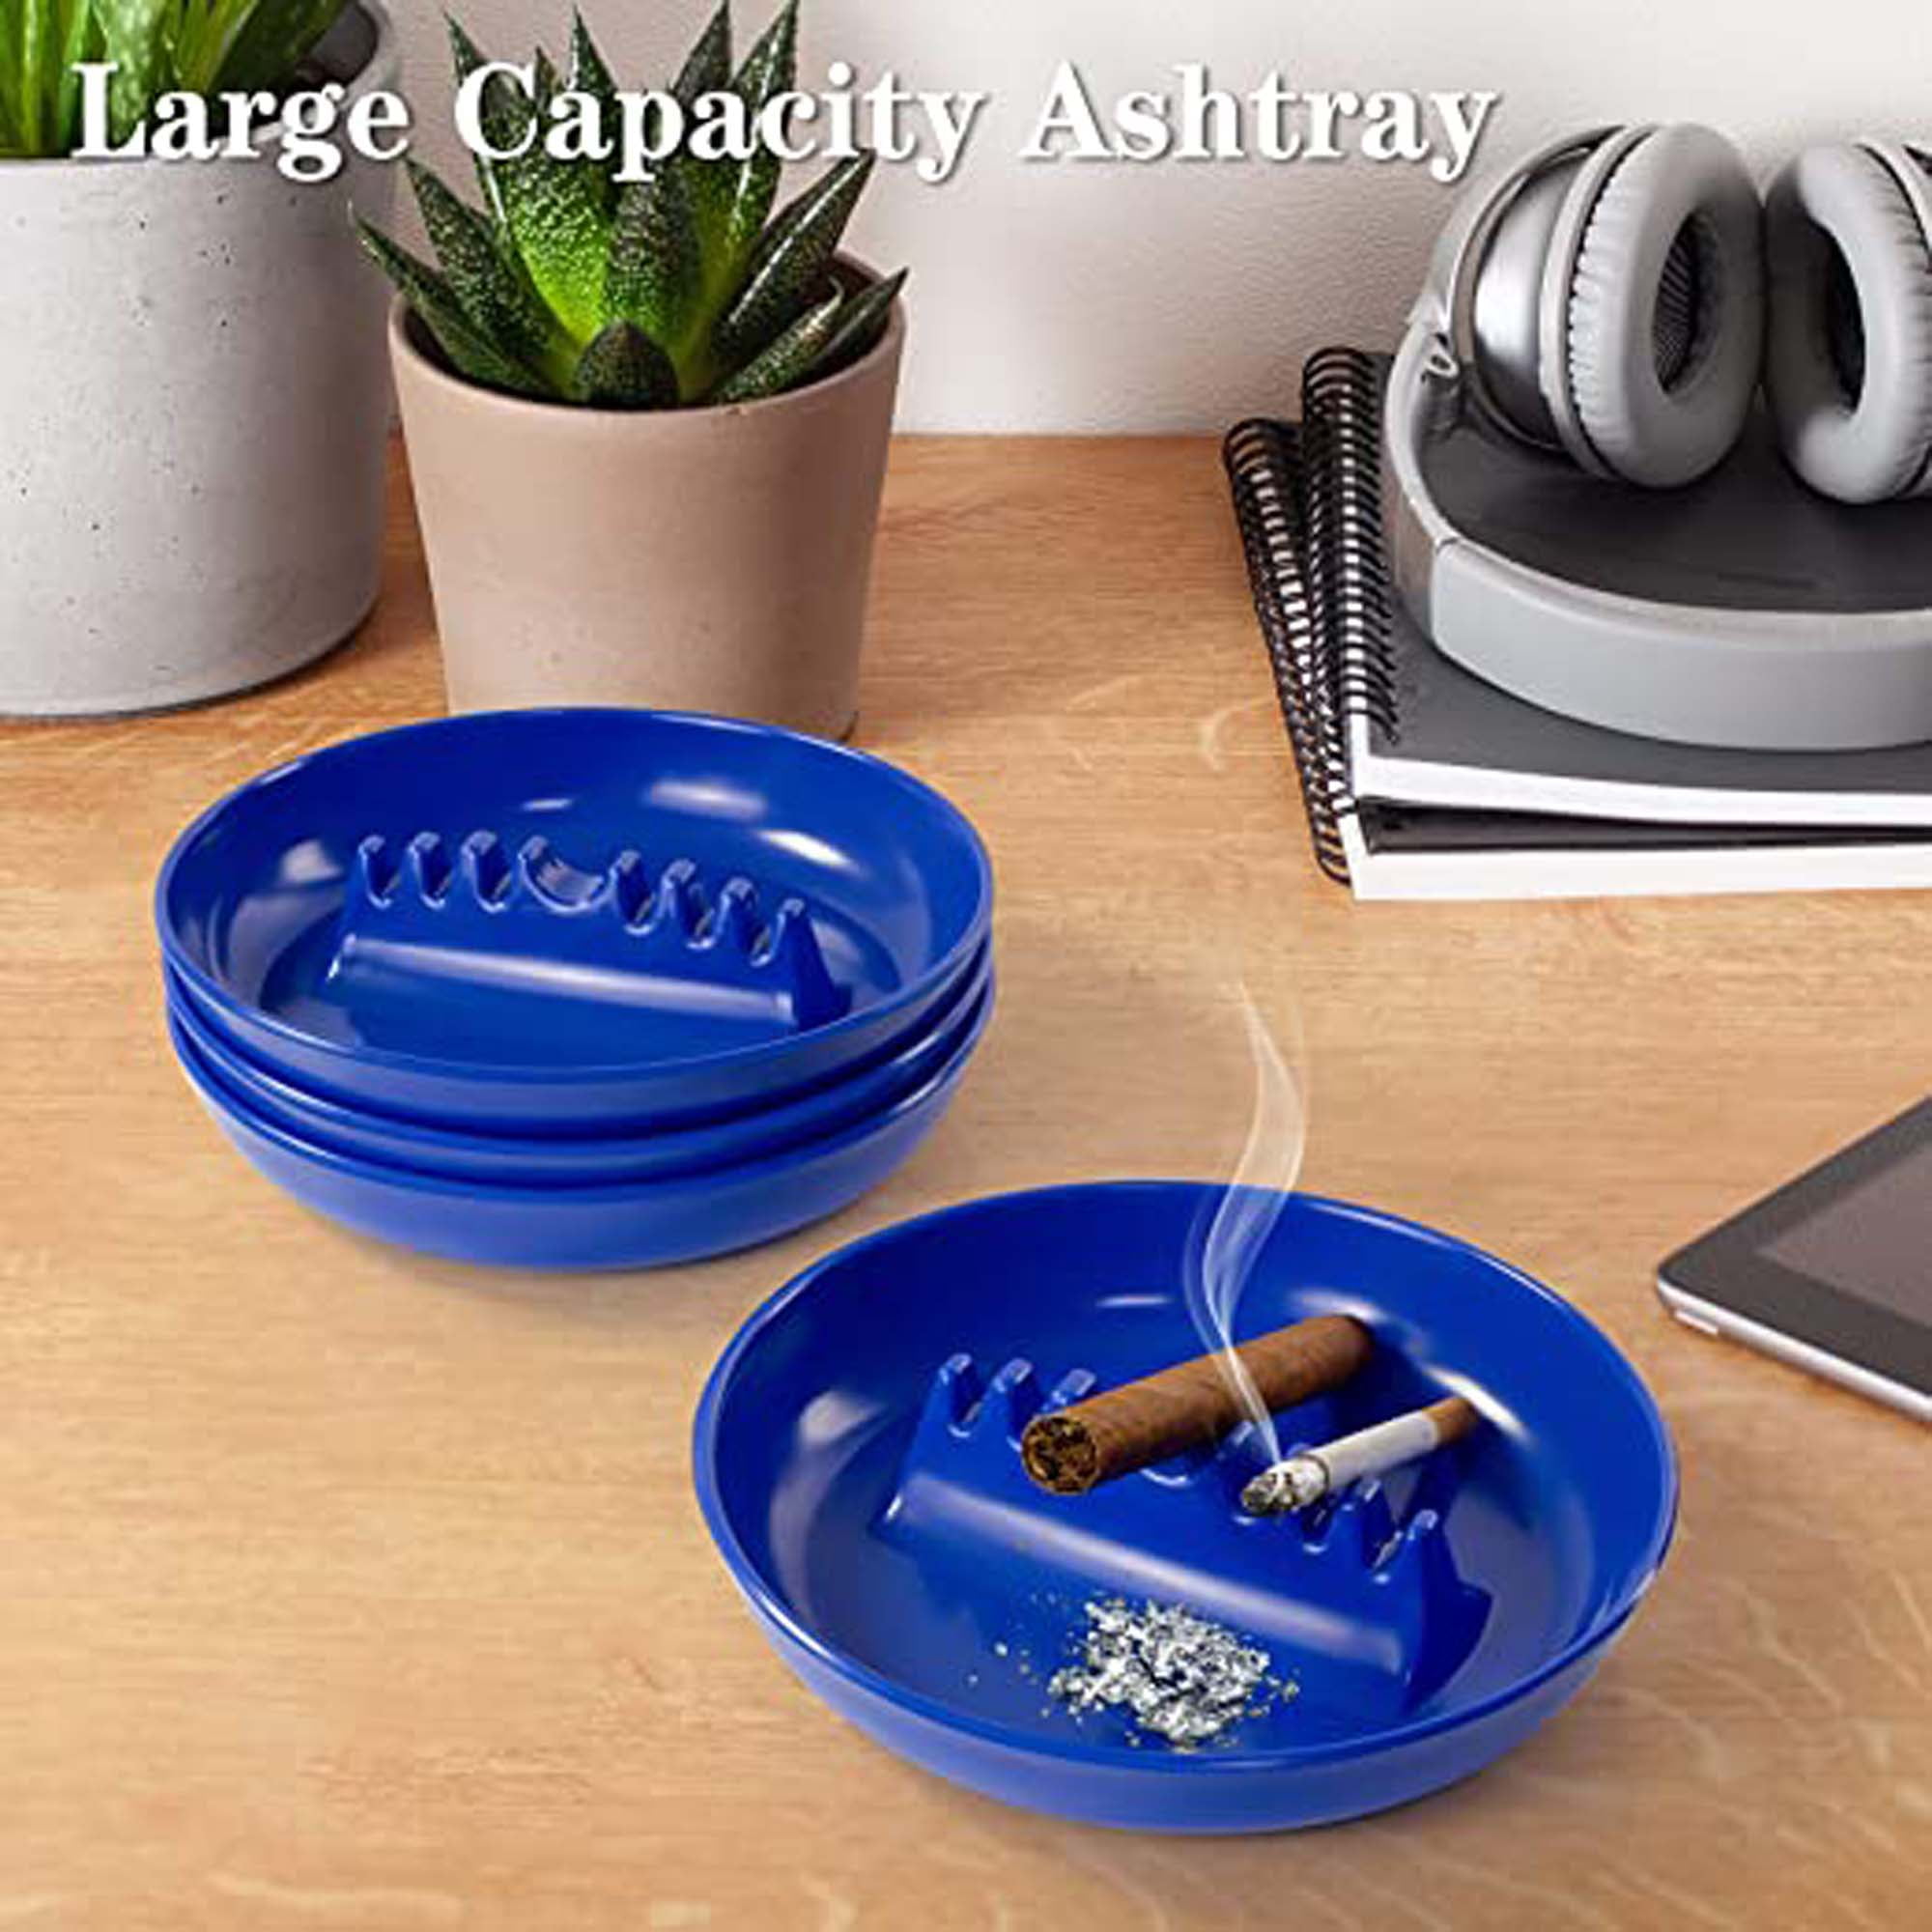 4 PCS Plastic Ashtrays for Cigarettes Cigar, Ash Tray Round Plastic Melamine  Tabletop Ashtrays For Indoor/Outdoor, Patio, Restaurant Style,Black 